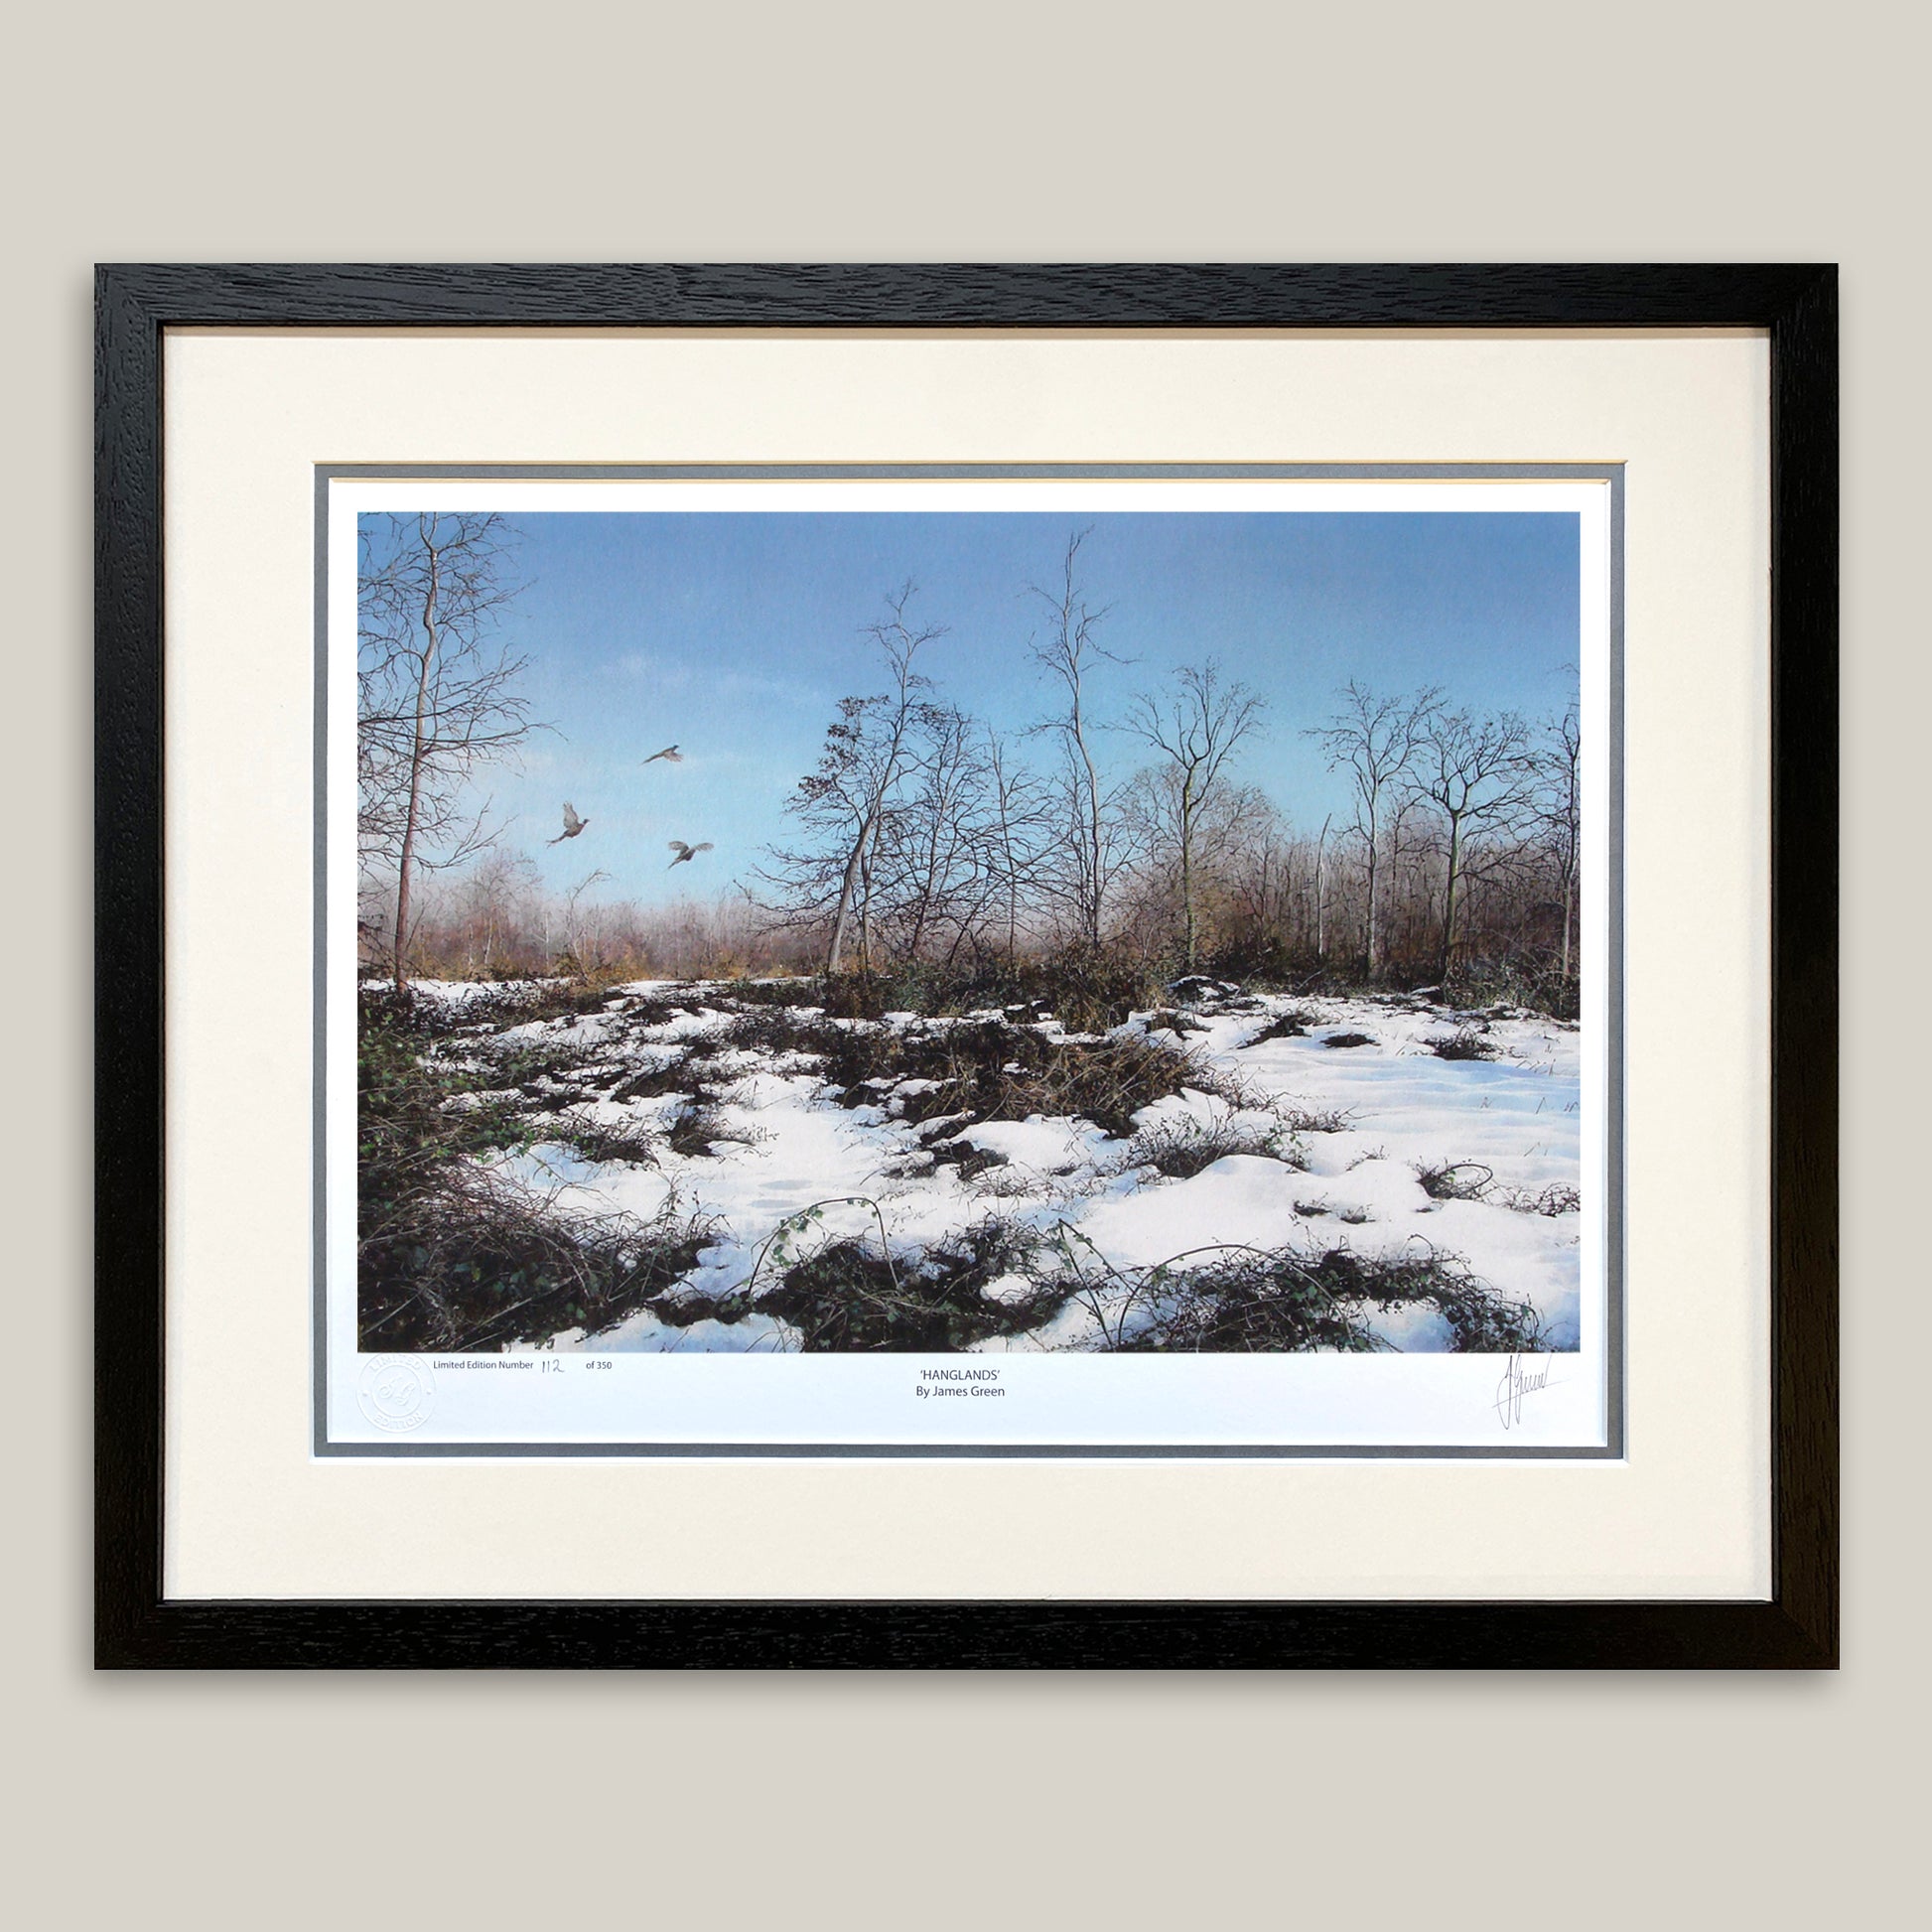 Painting of Pheasants flying in a snowy woodland, in a black frame